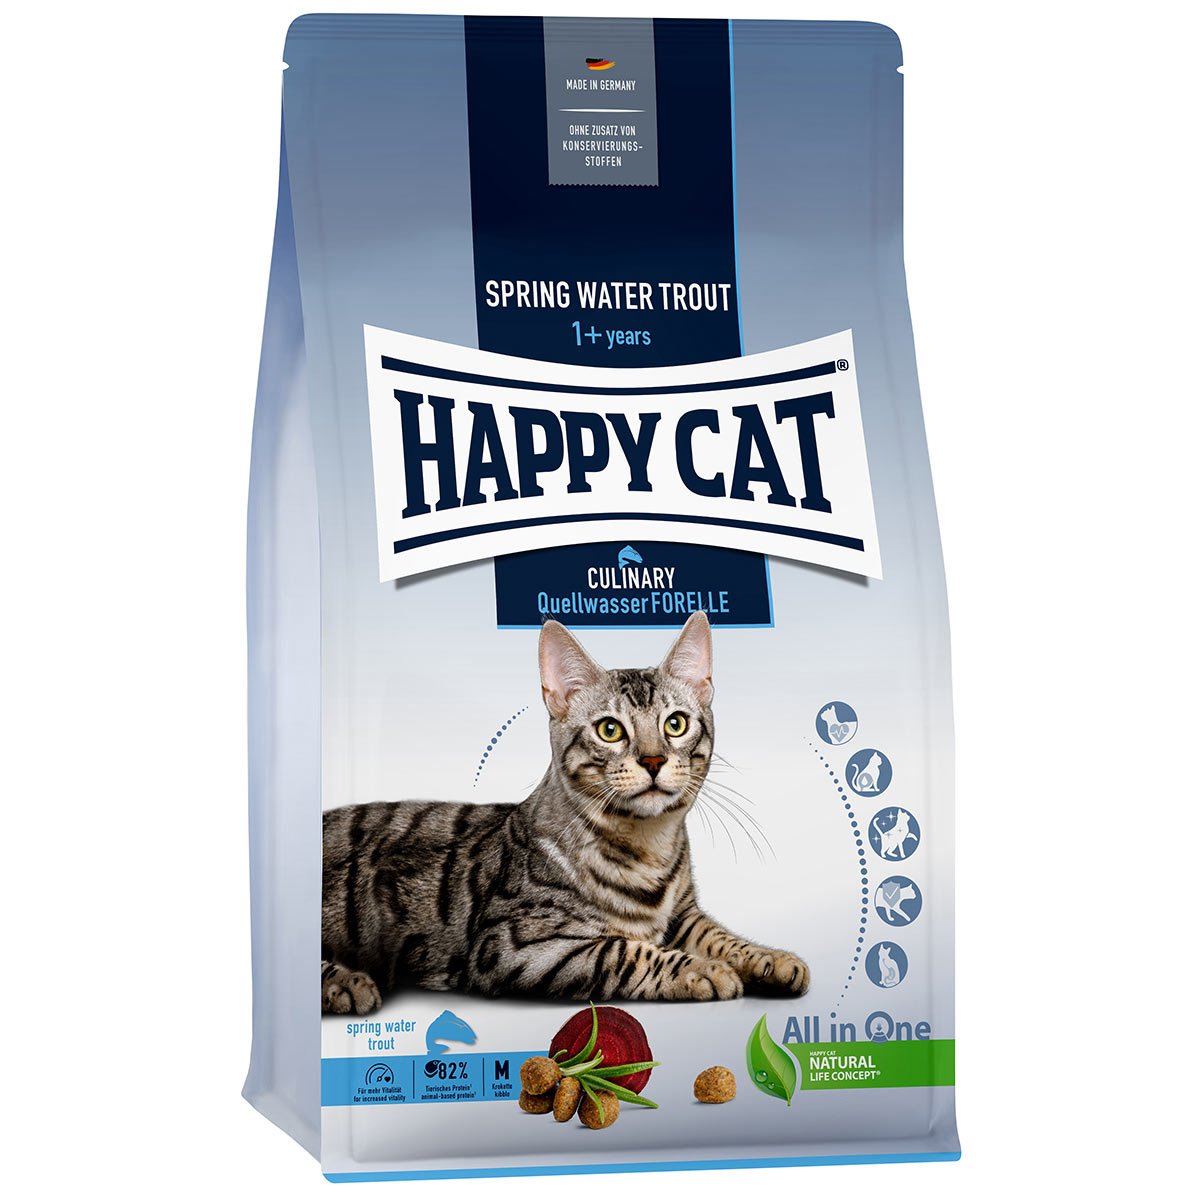 Happy Cat Culinary Adult Quellwasser Forelle 1